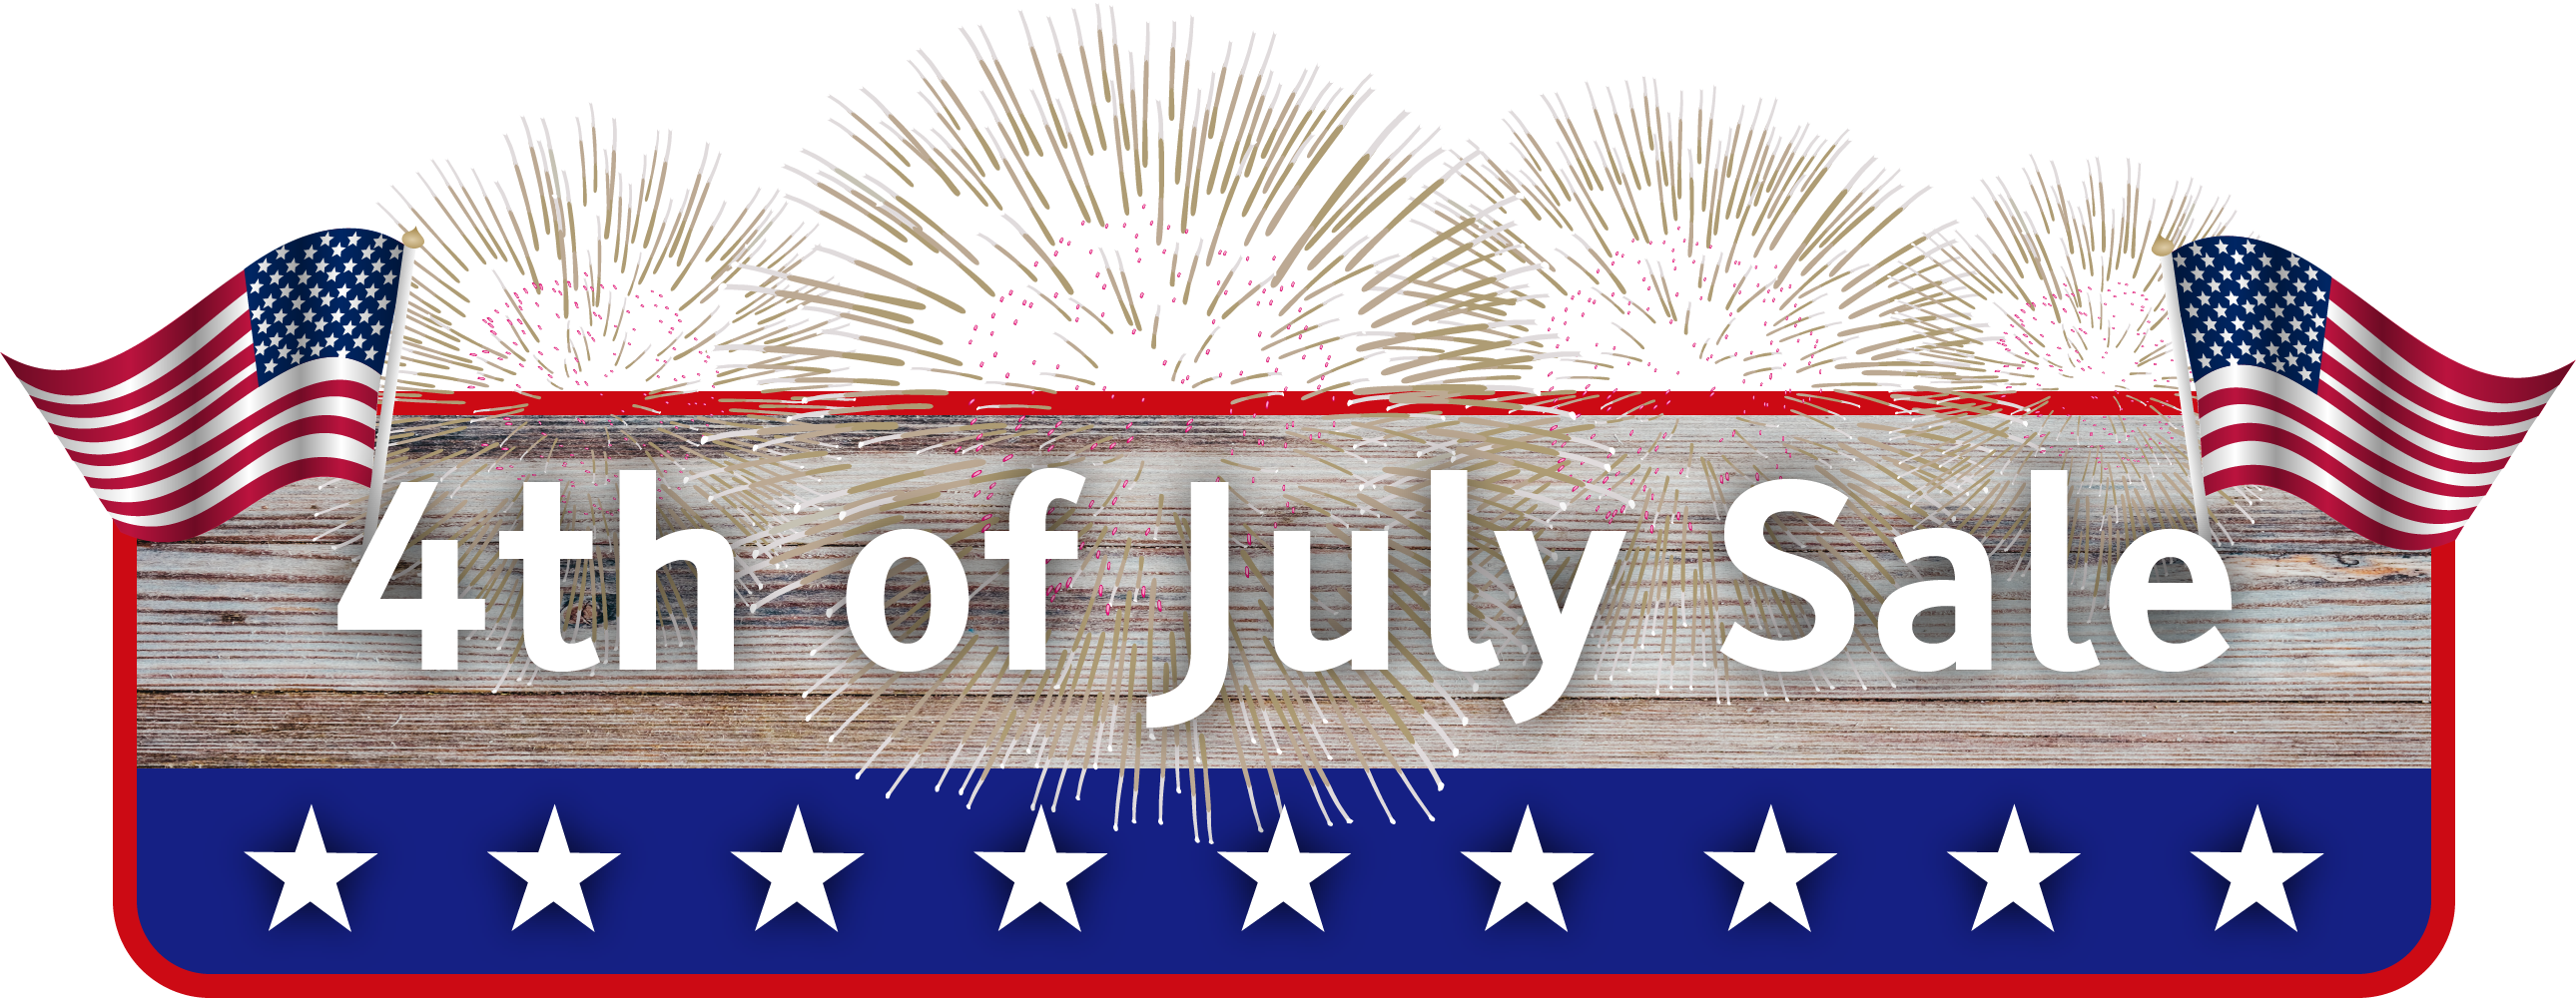 4th of July Deals graphic